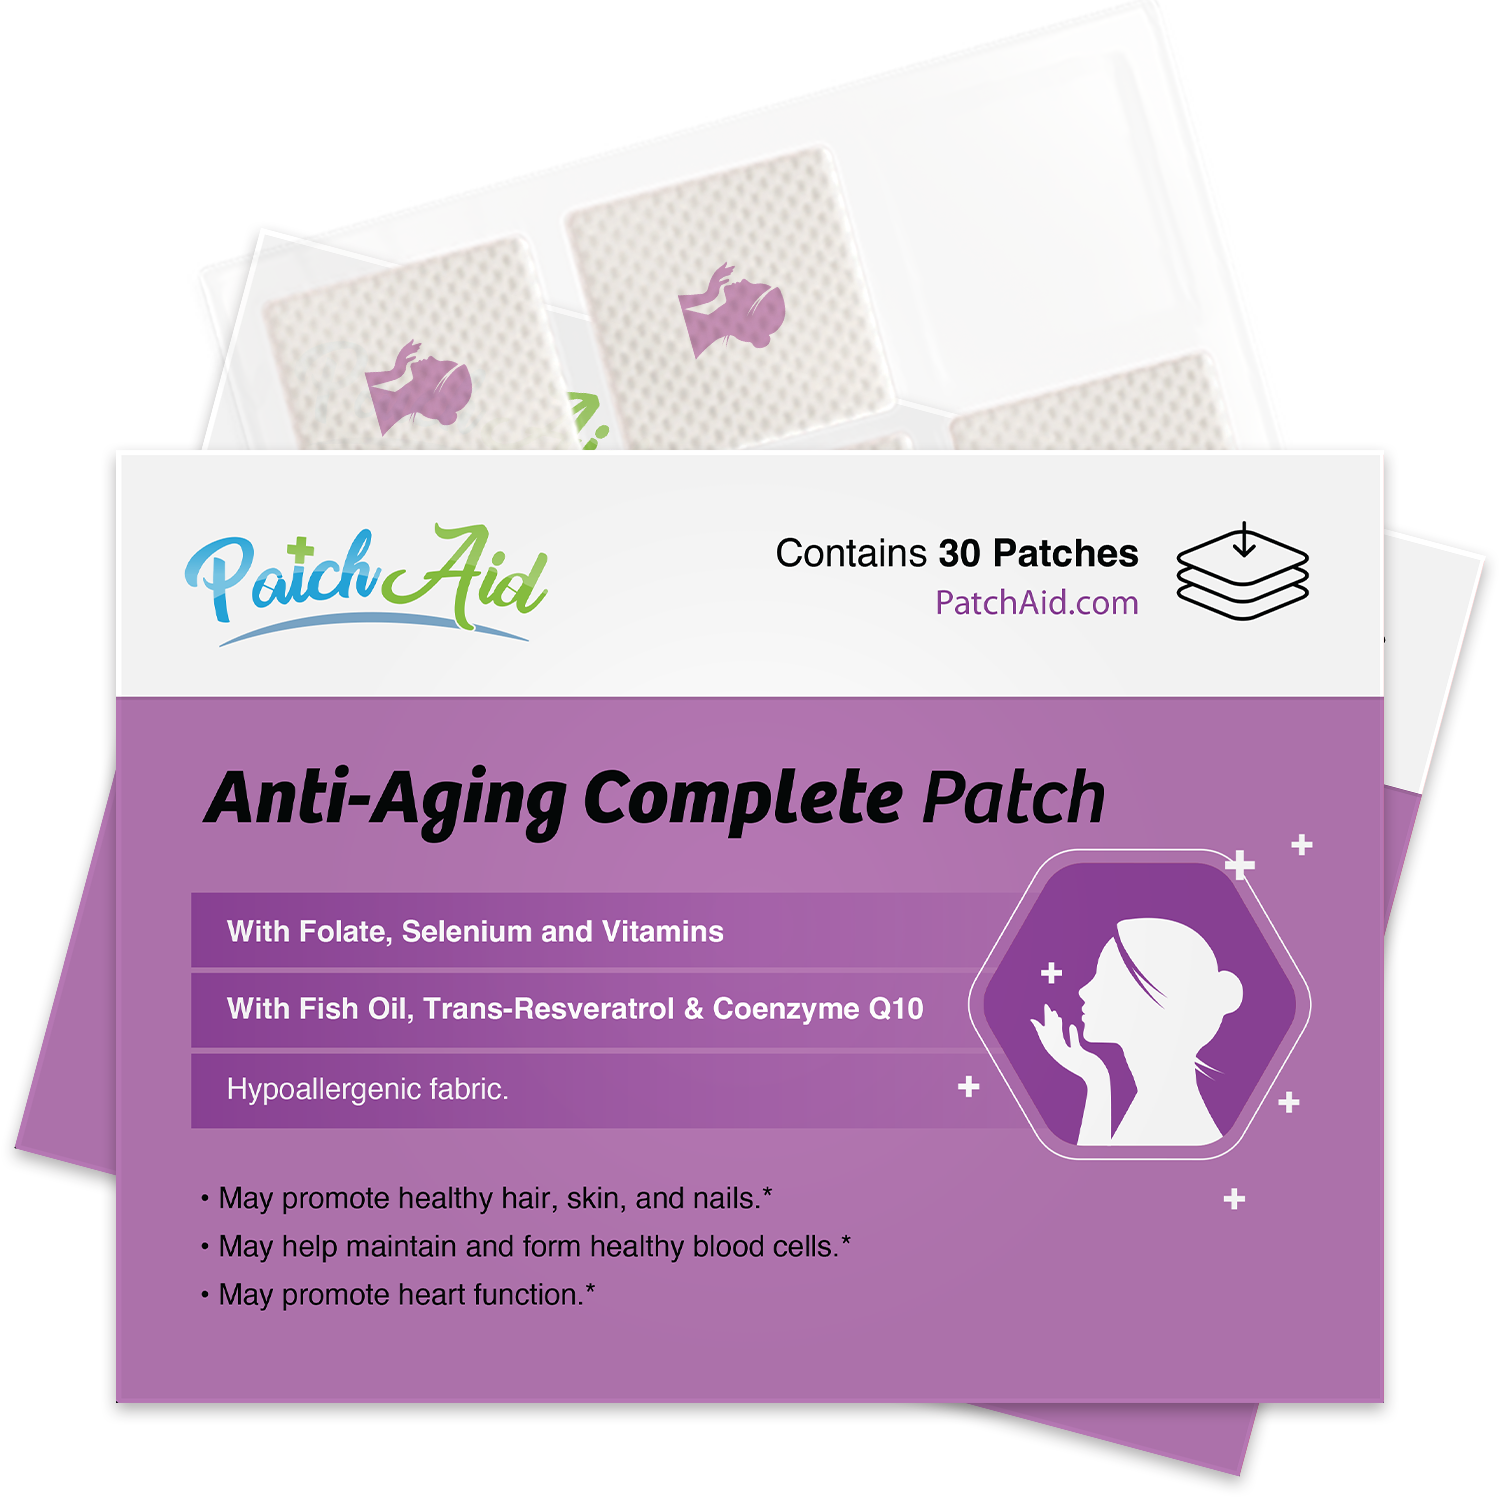 Anti-Aging Complete Topical Vitamin Patch by PatchAid